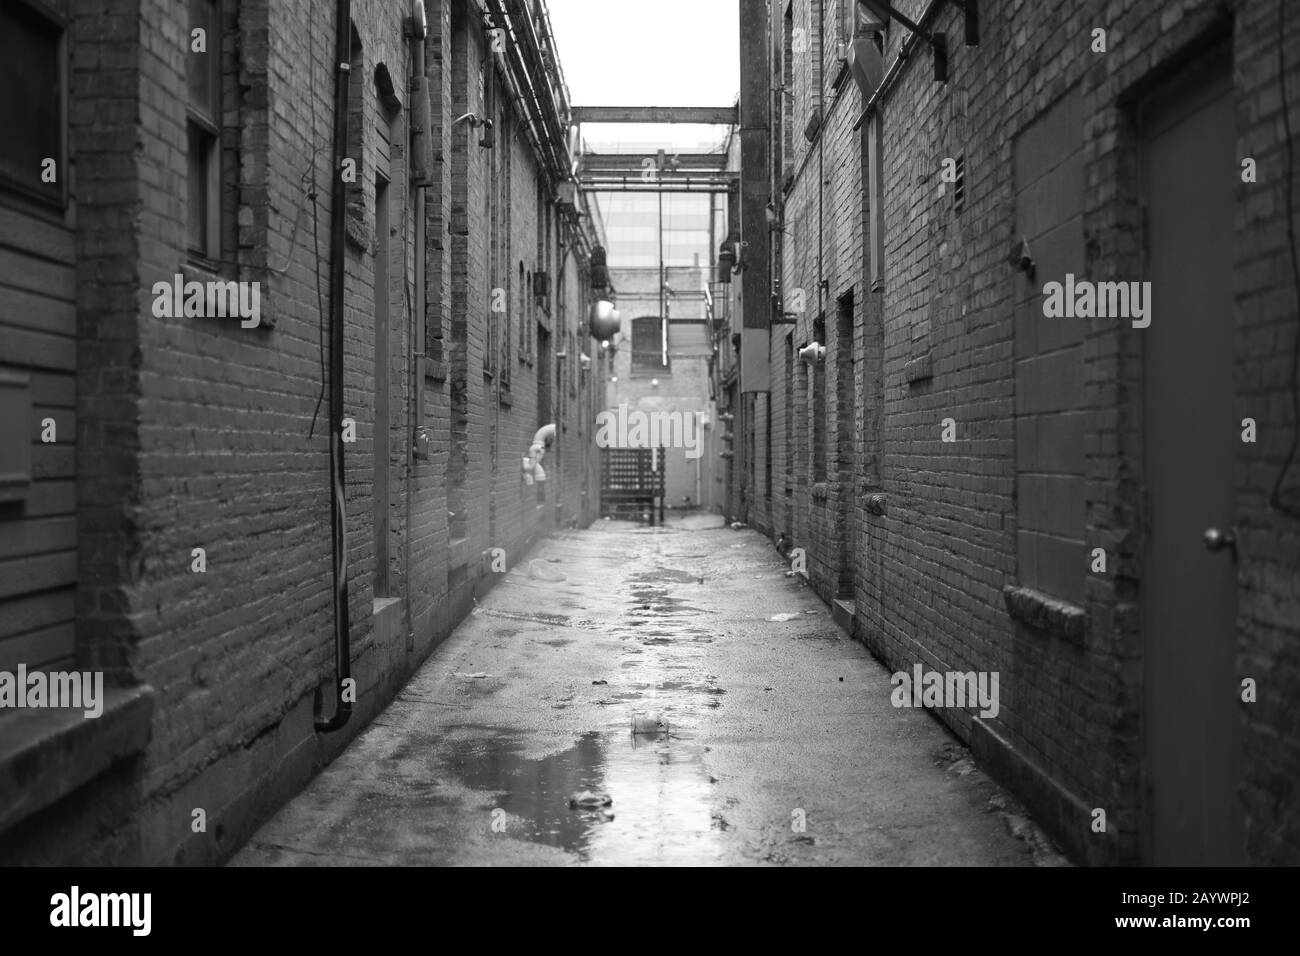 Street alley in the city on a rainy day Stock Photo